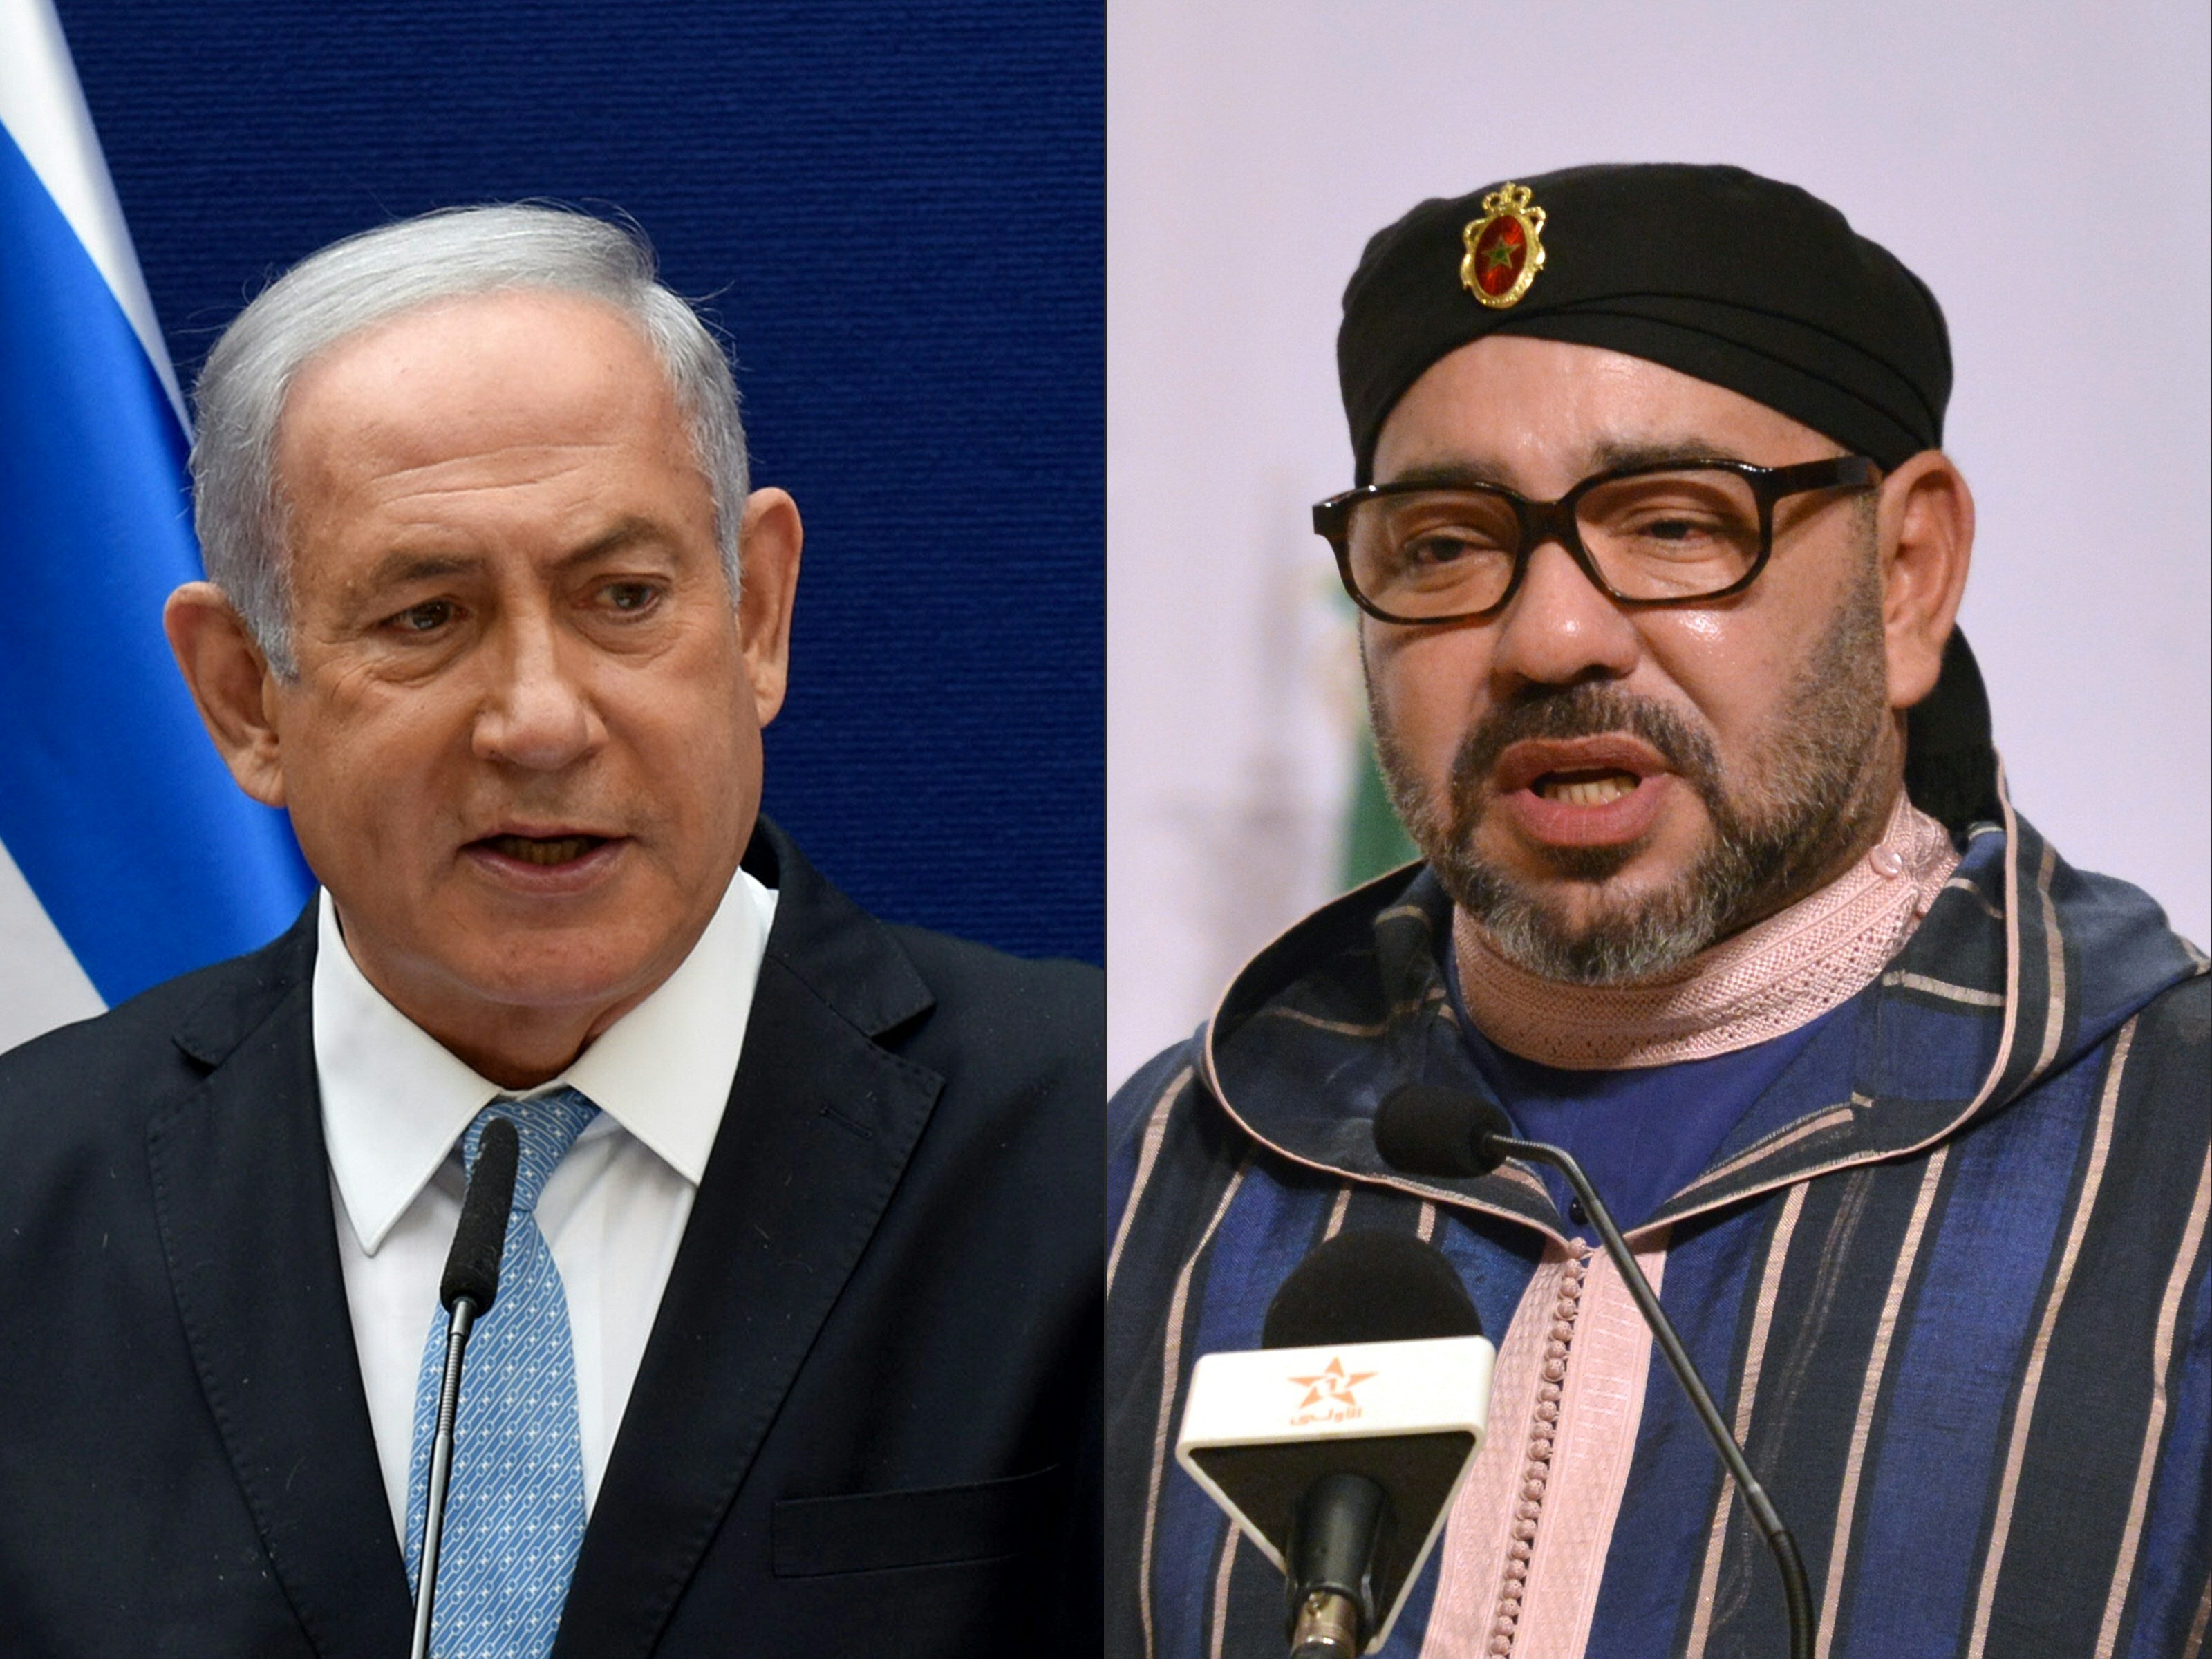 Israeli Prime Minister Benjamin Netanyahu and Morocco’s King Mohammed VI are pictured separately (AFP)